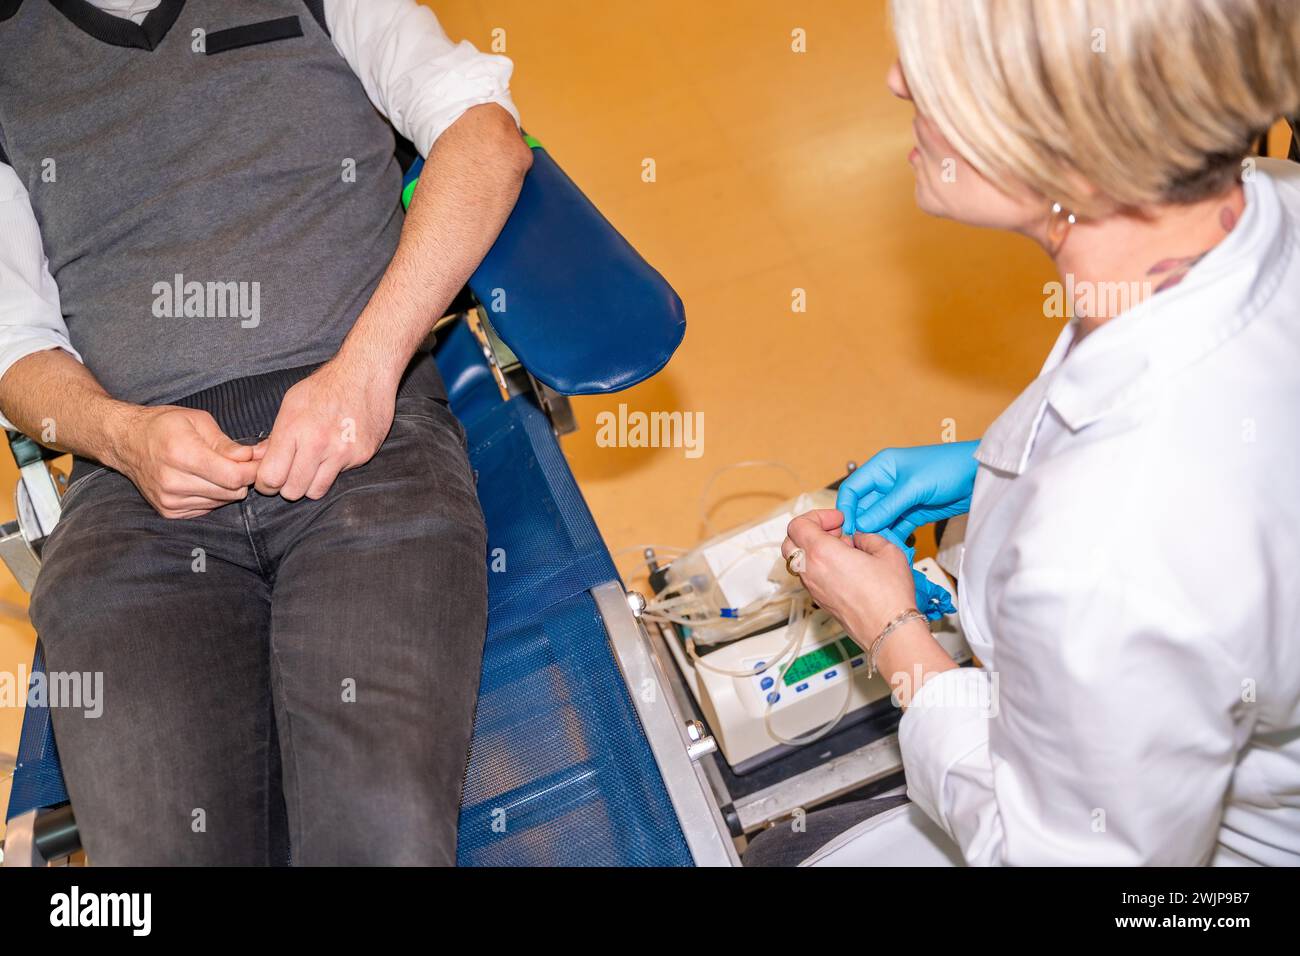 Top view close-up of a female nurse preparing the material for a blood donation next to a volunteer sitting in a chair Stock Photo